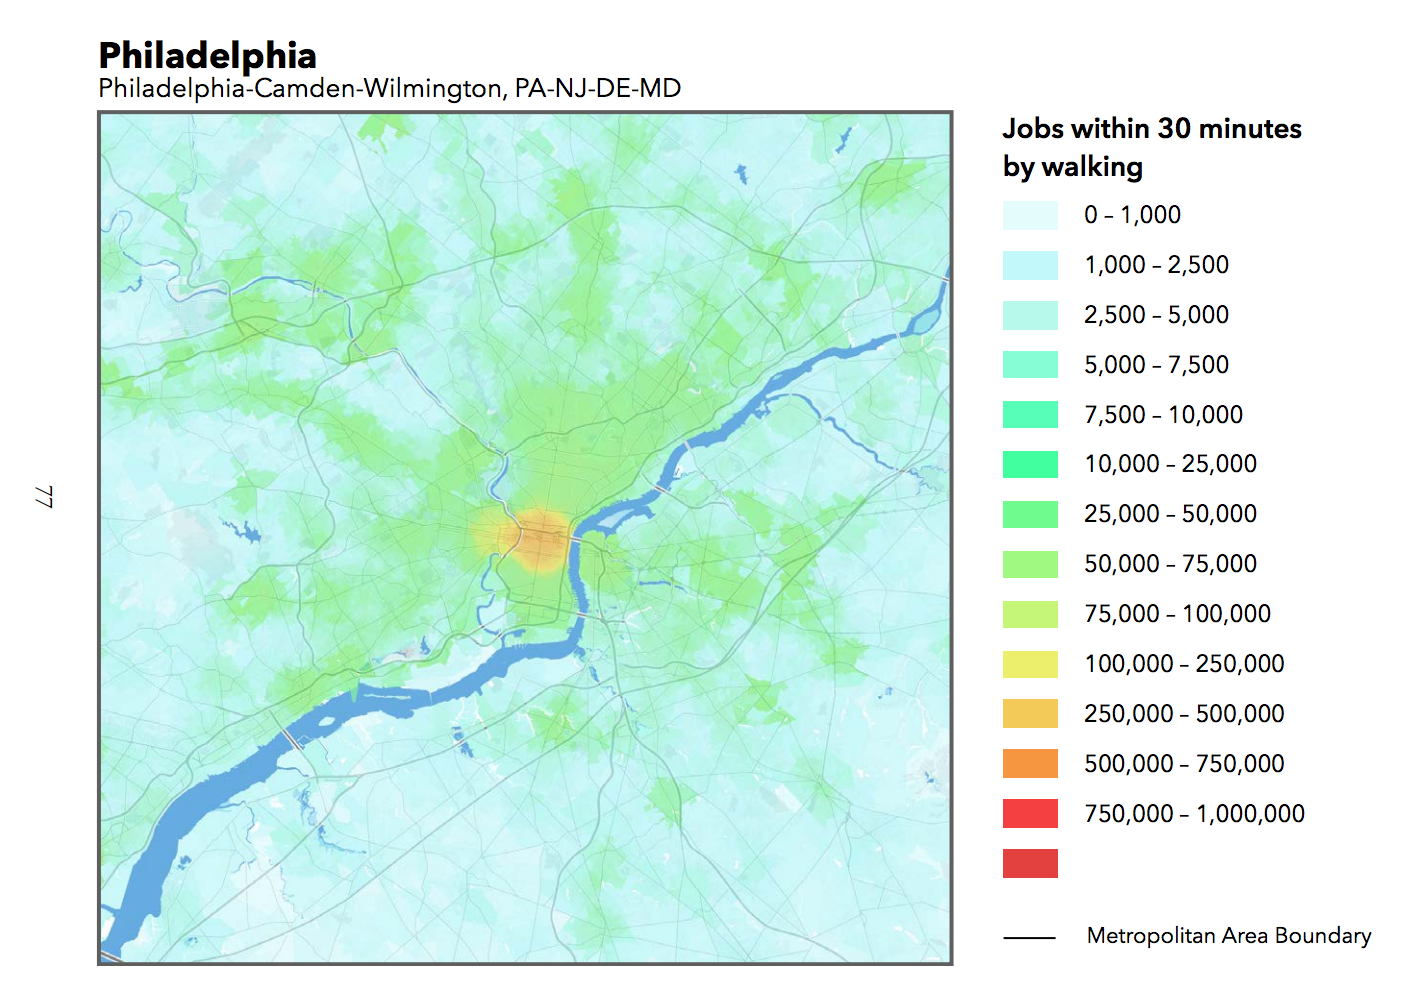 Jobs within 30 minutes by walking